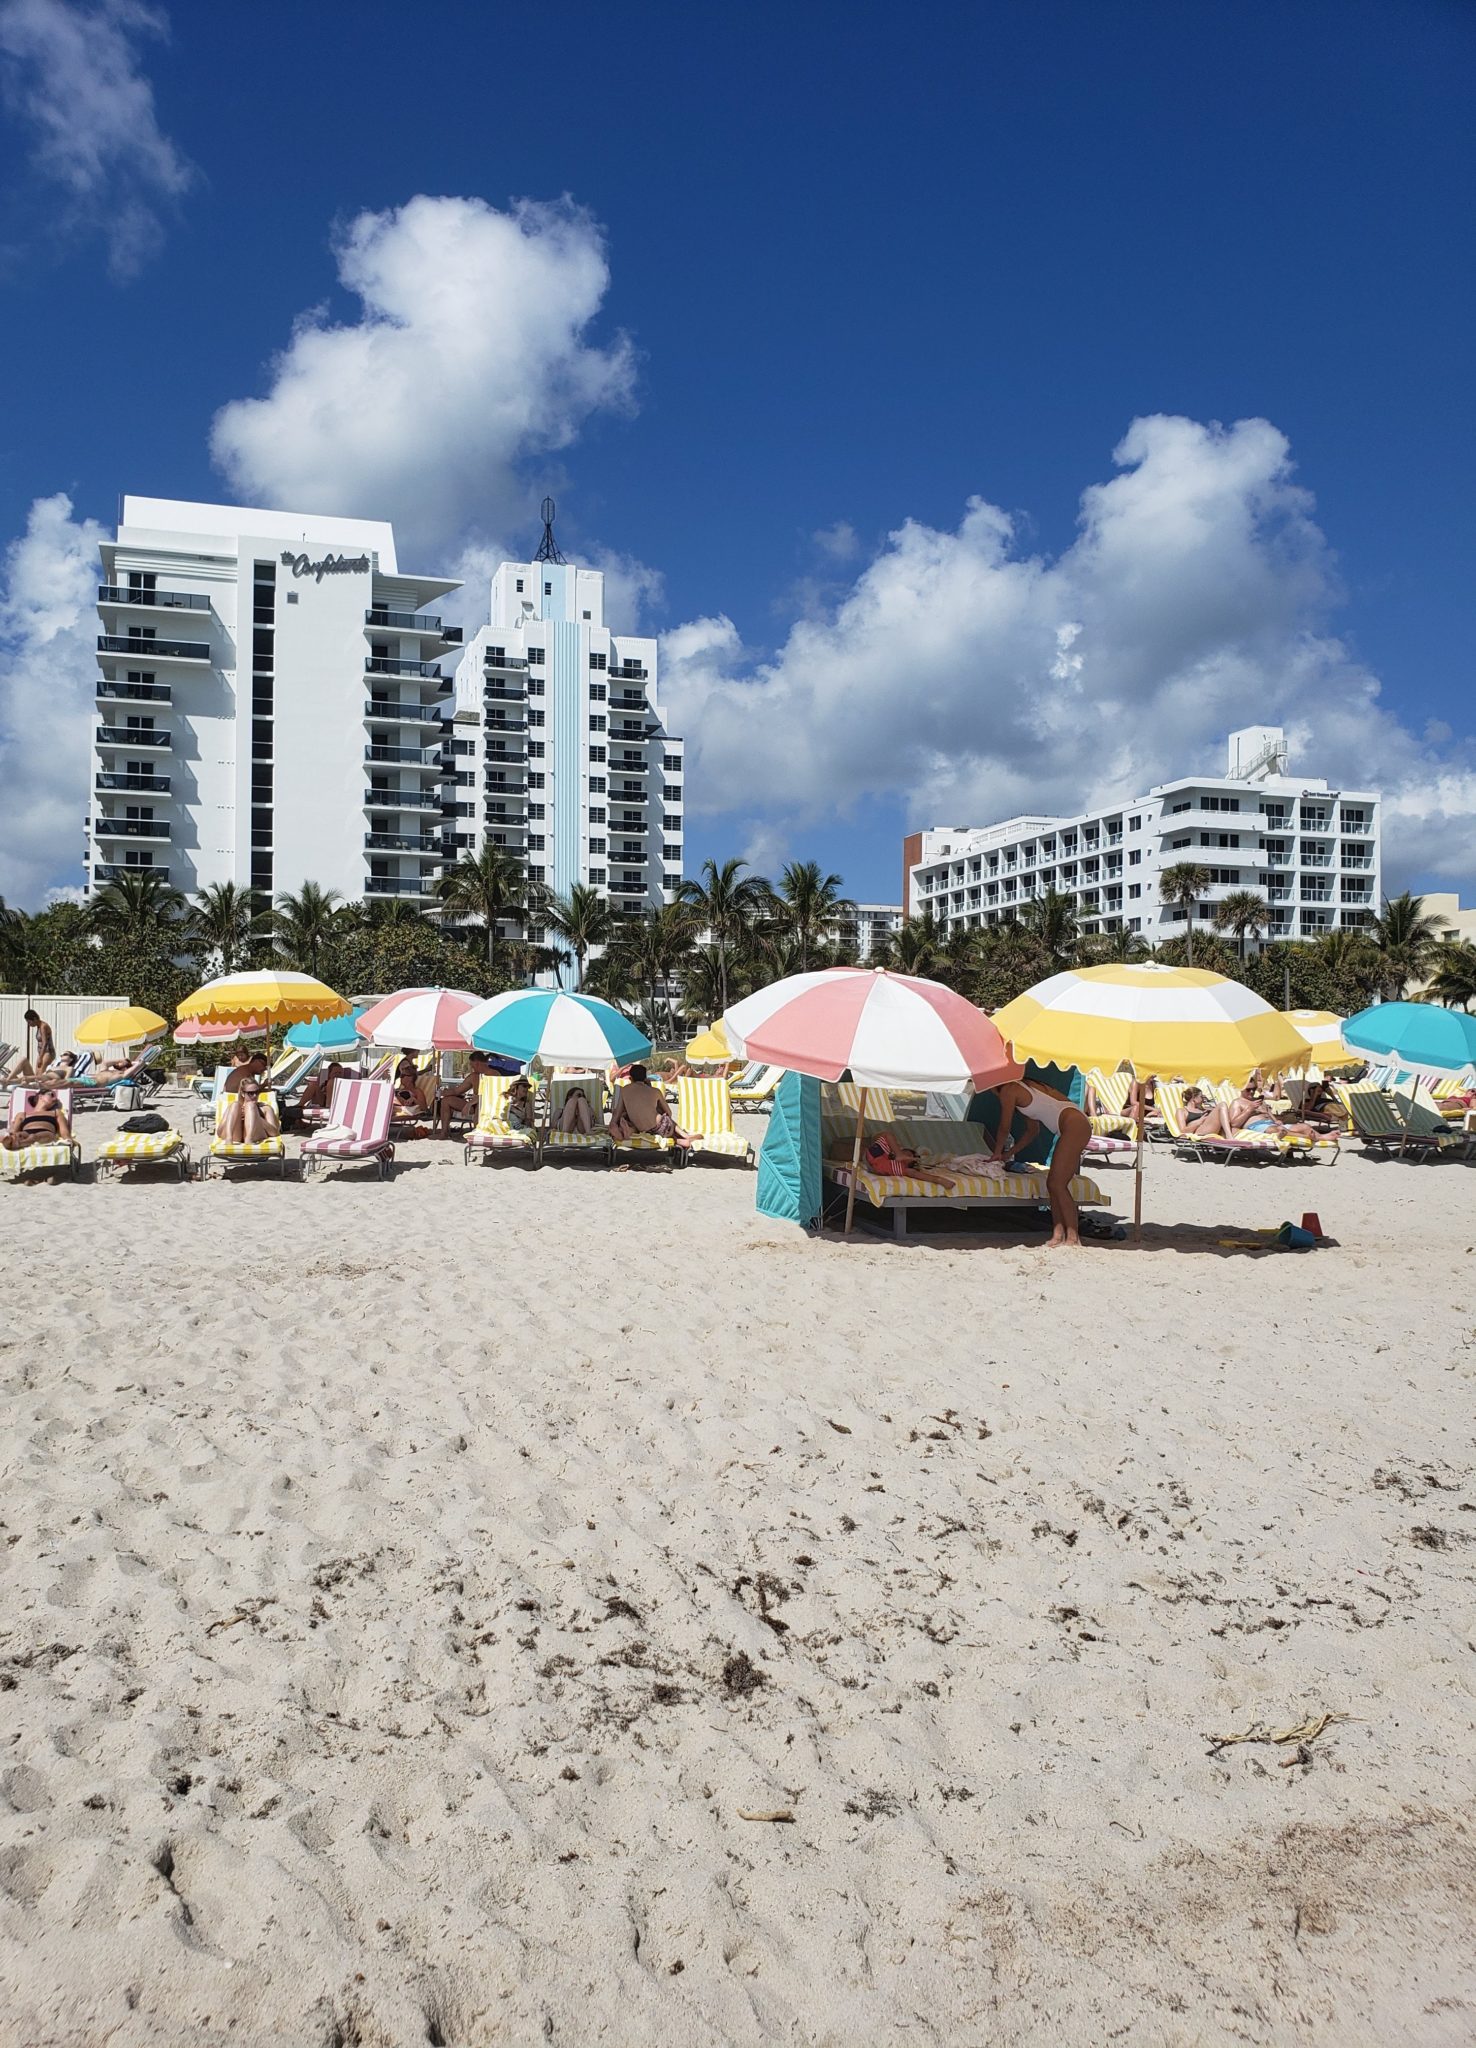 a group of people on a beach with umbrellas and chairs